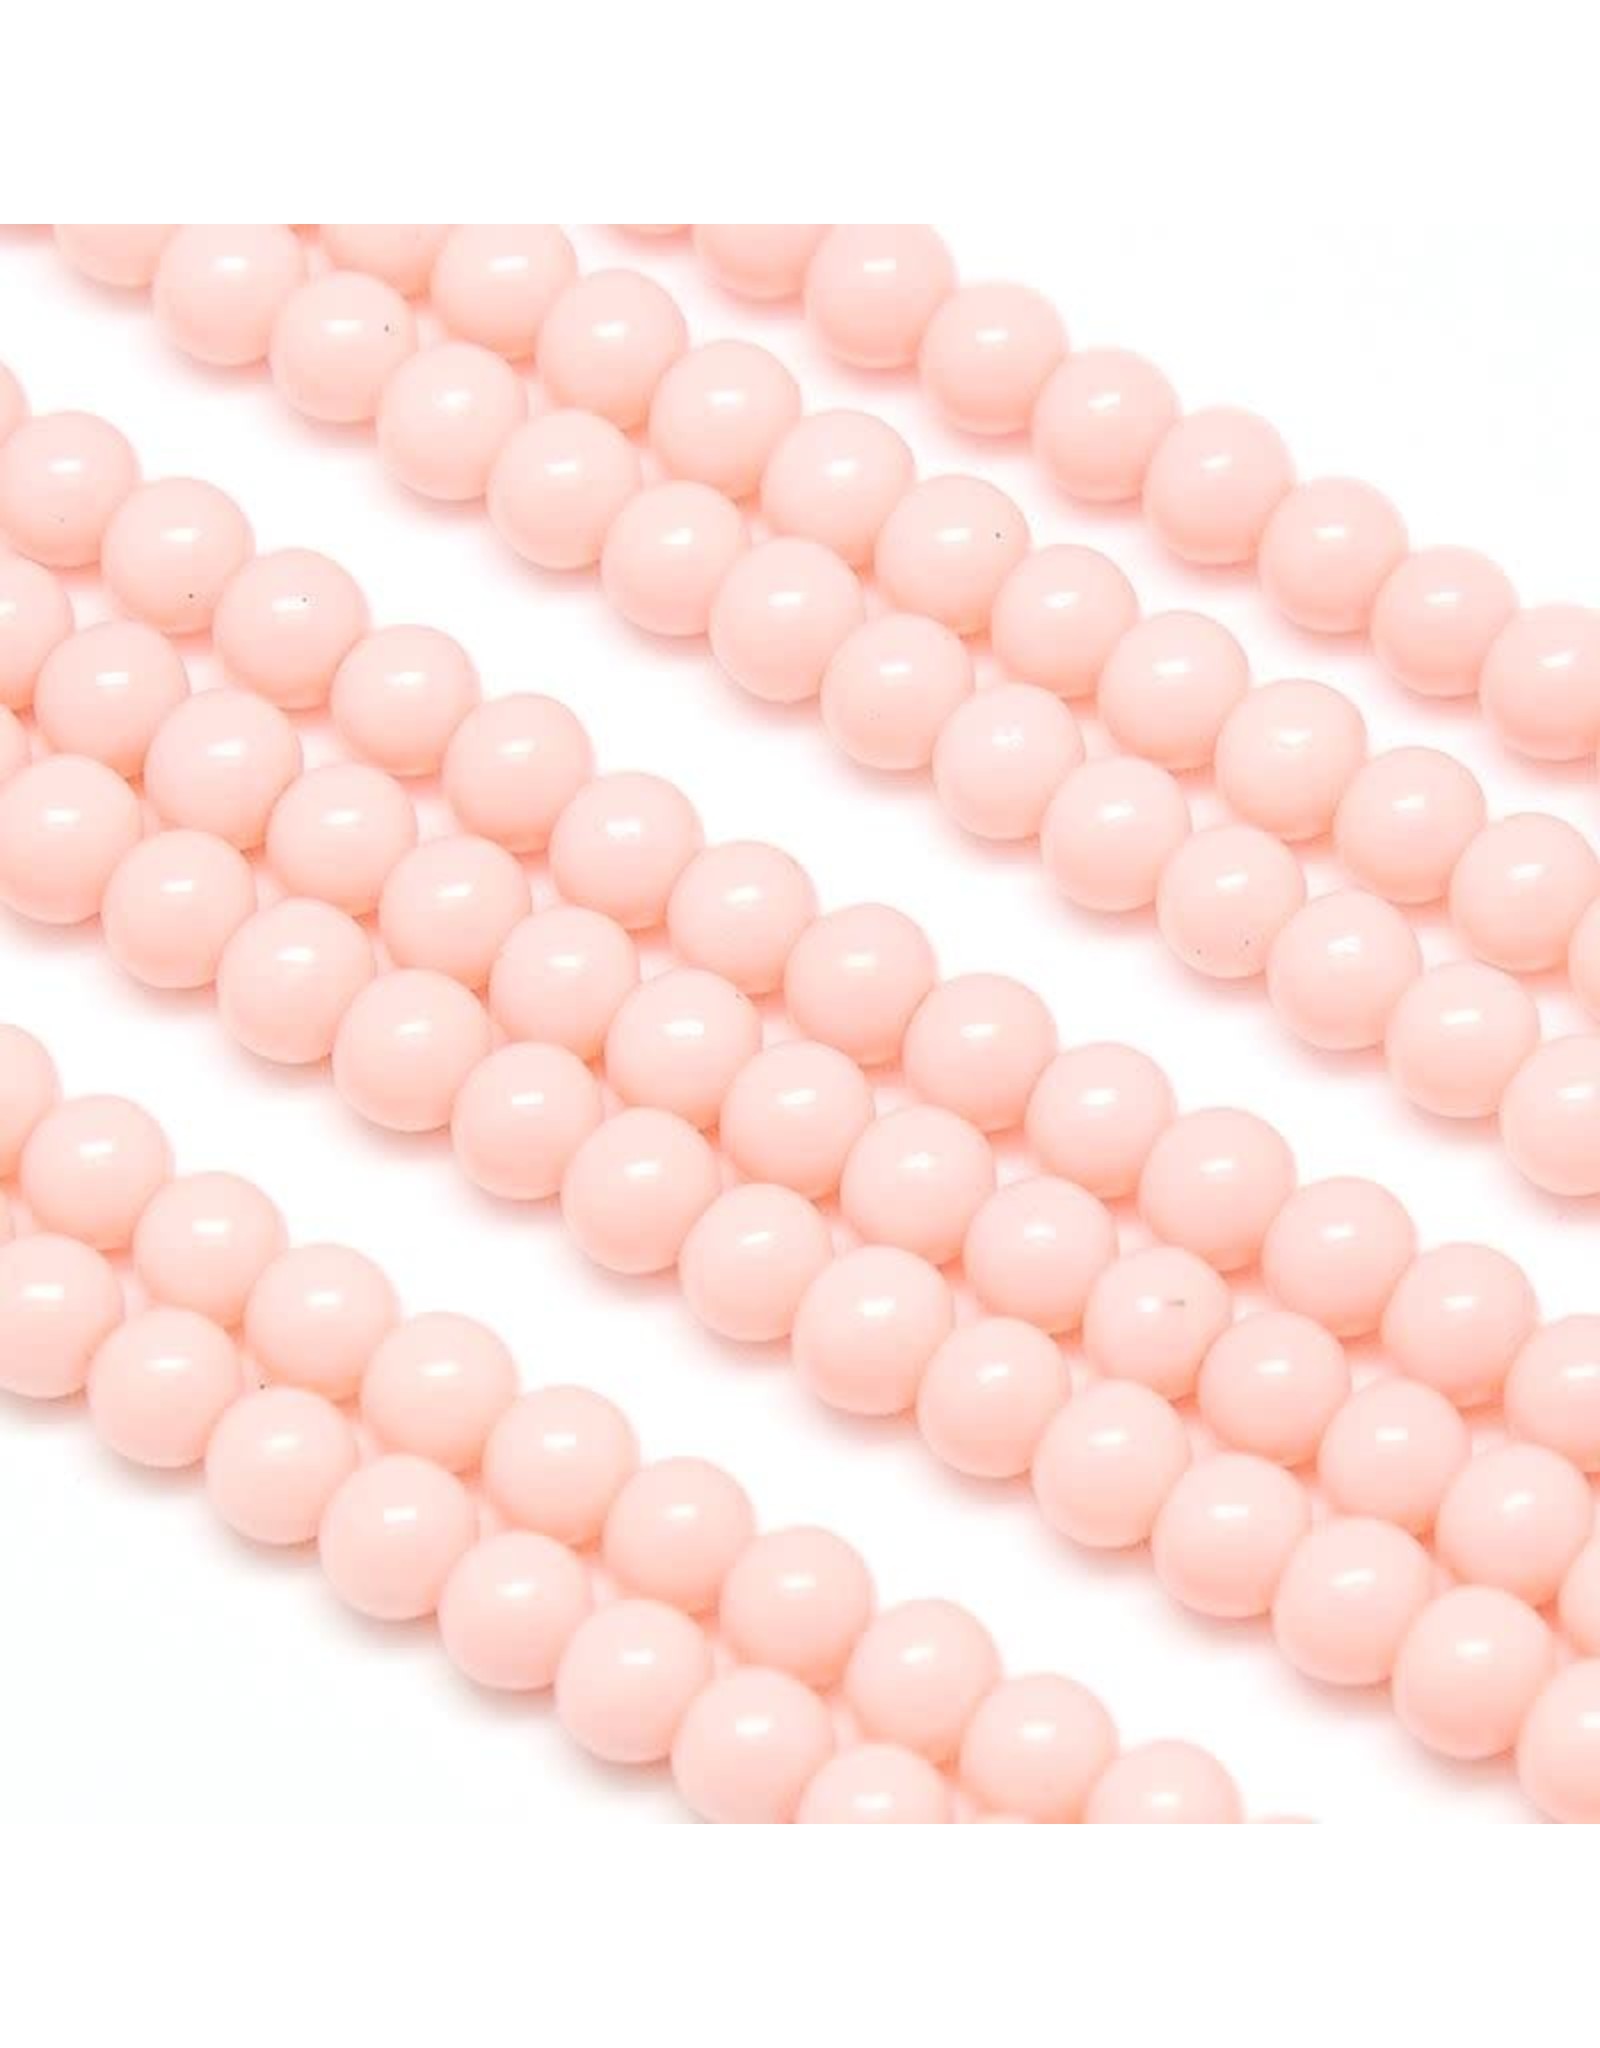 8mm Round Glass Pearl Pale Pink approx  x50